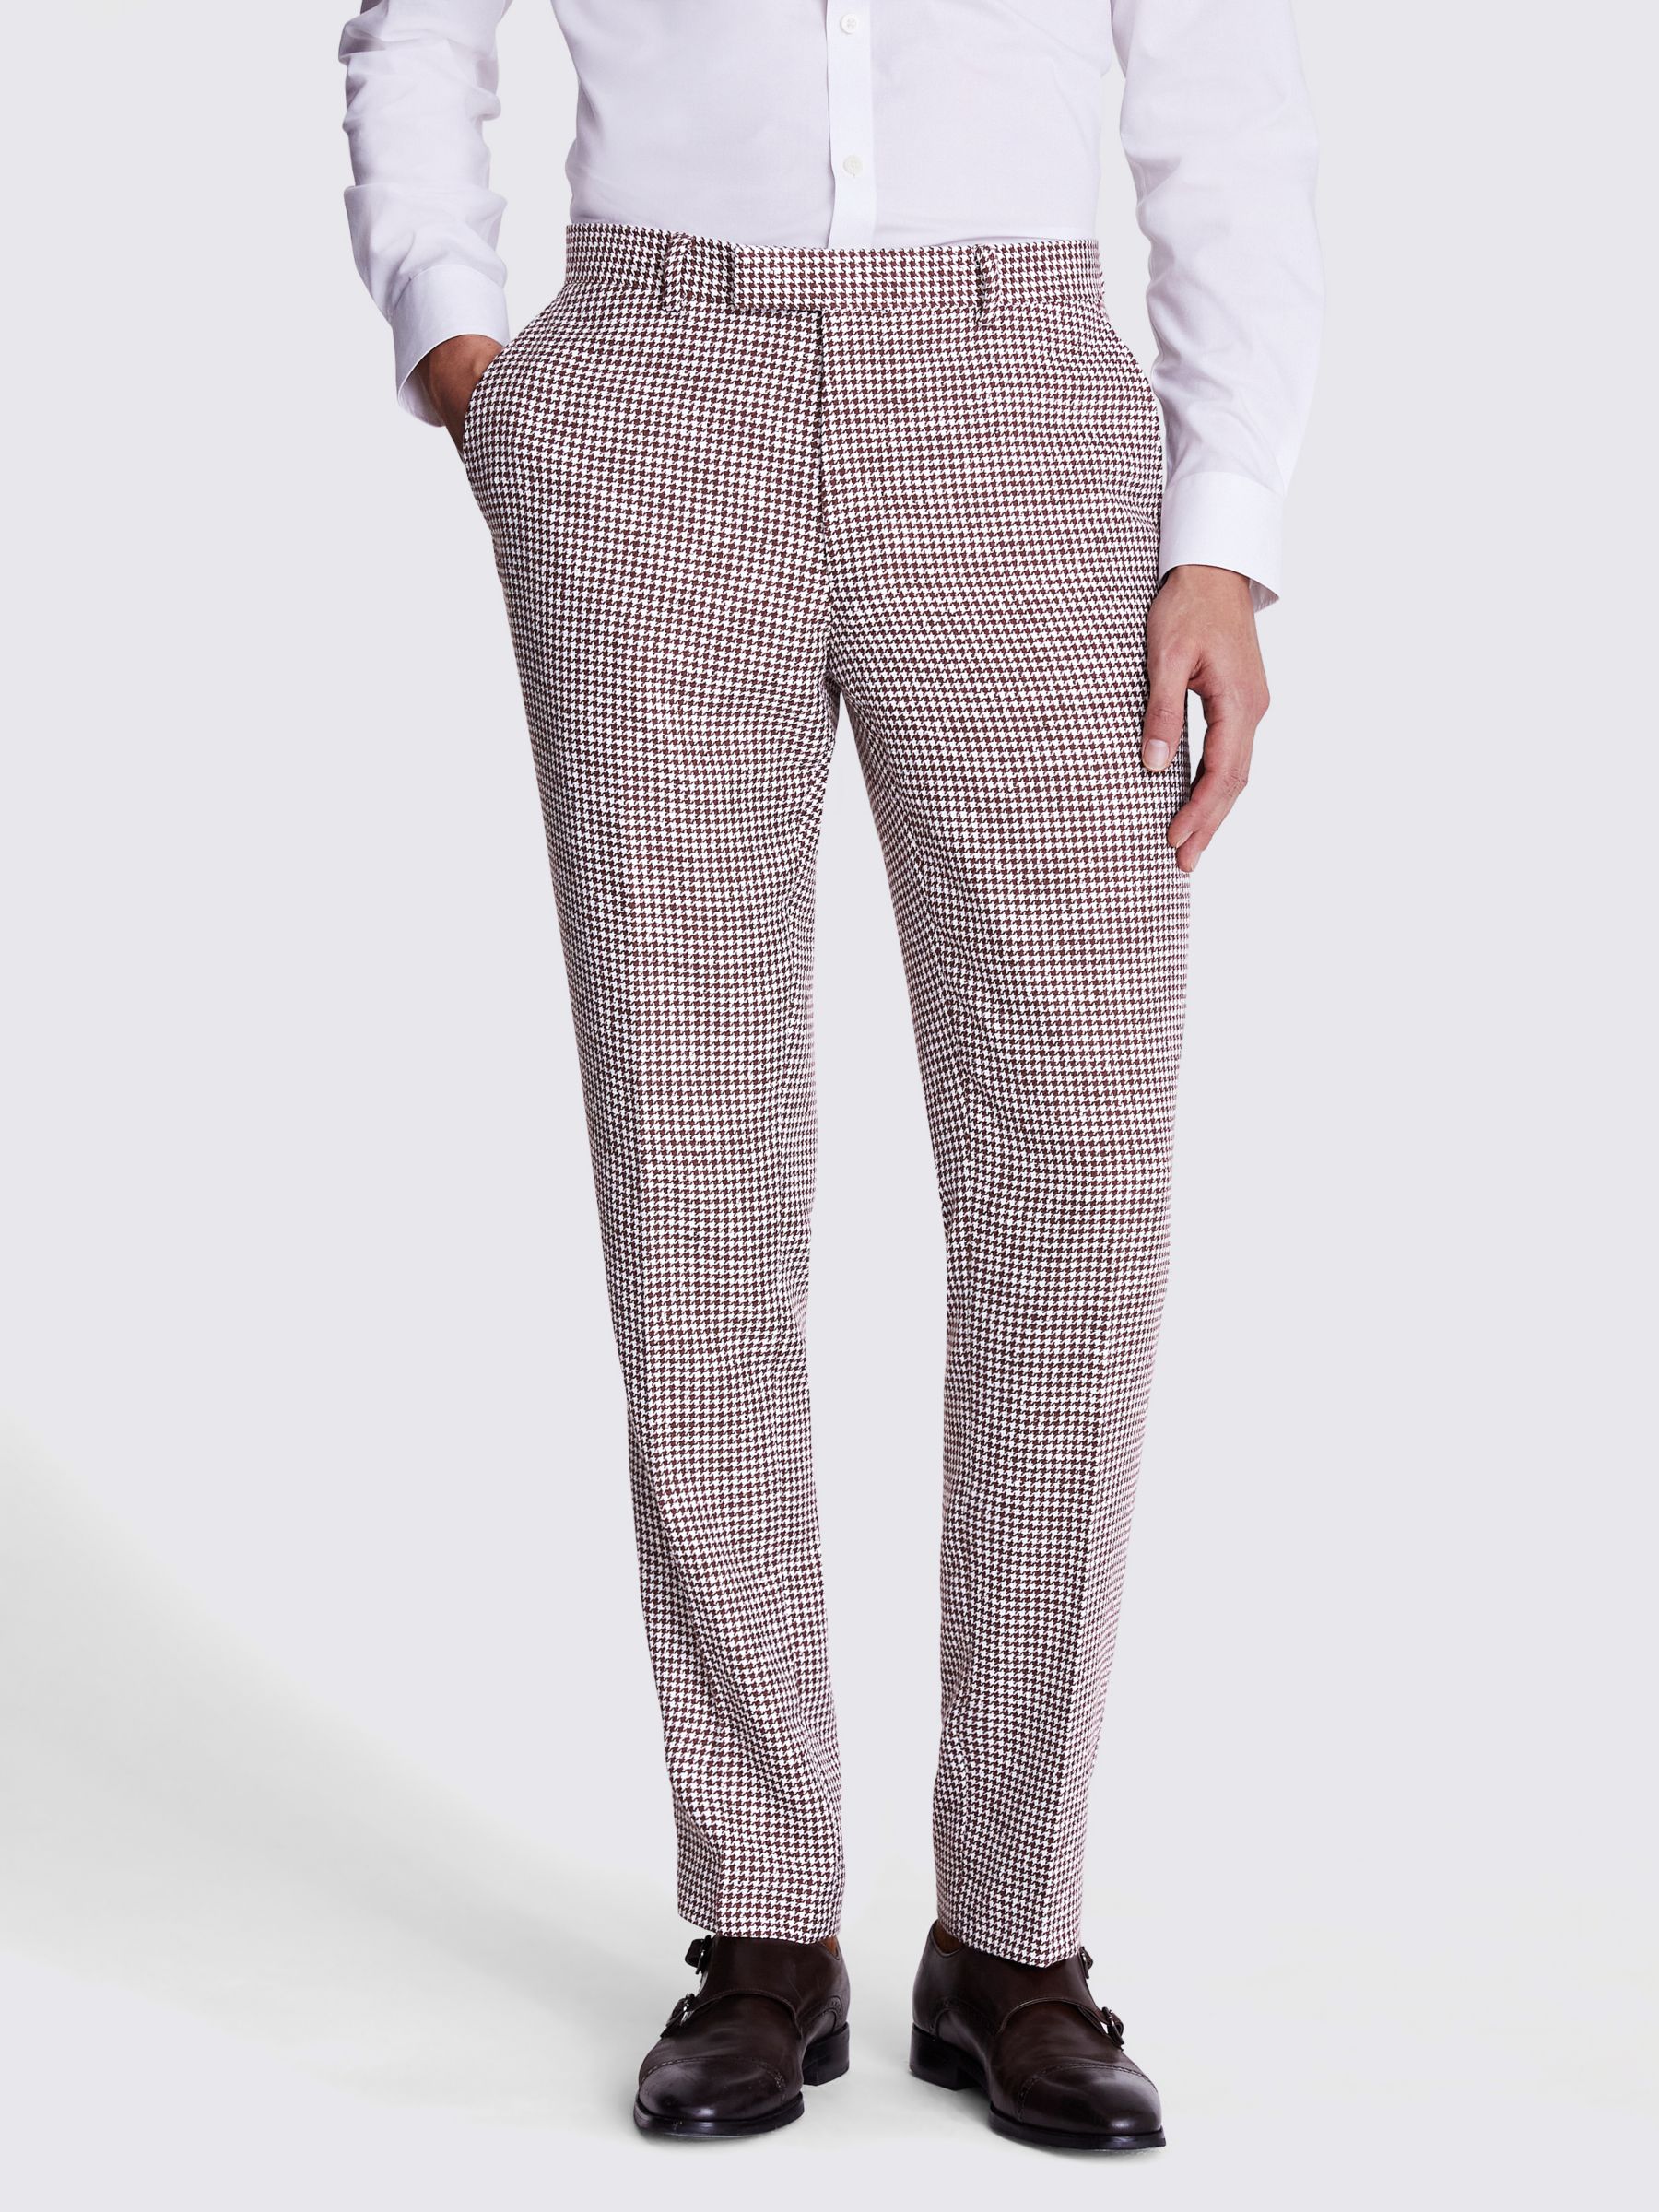 Moss Slim Fit Houndstooth Suit Trousers, Copper/White, 38L